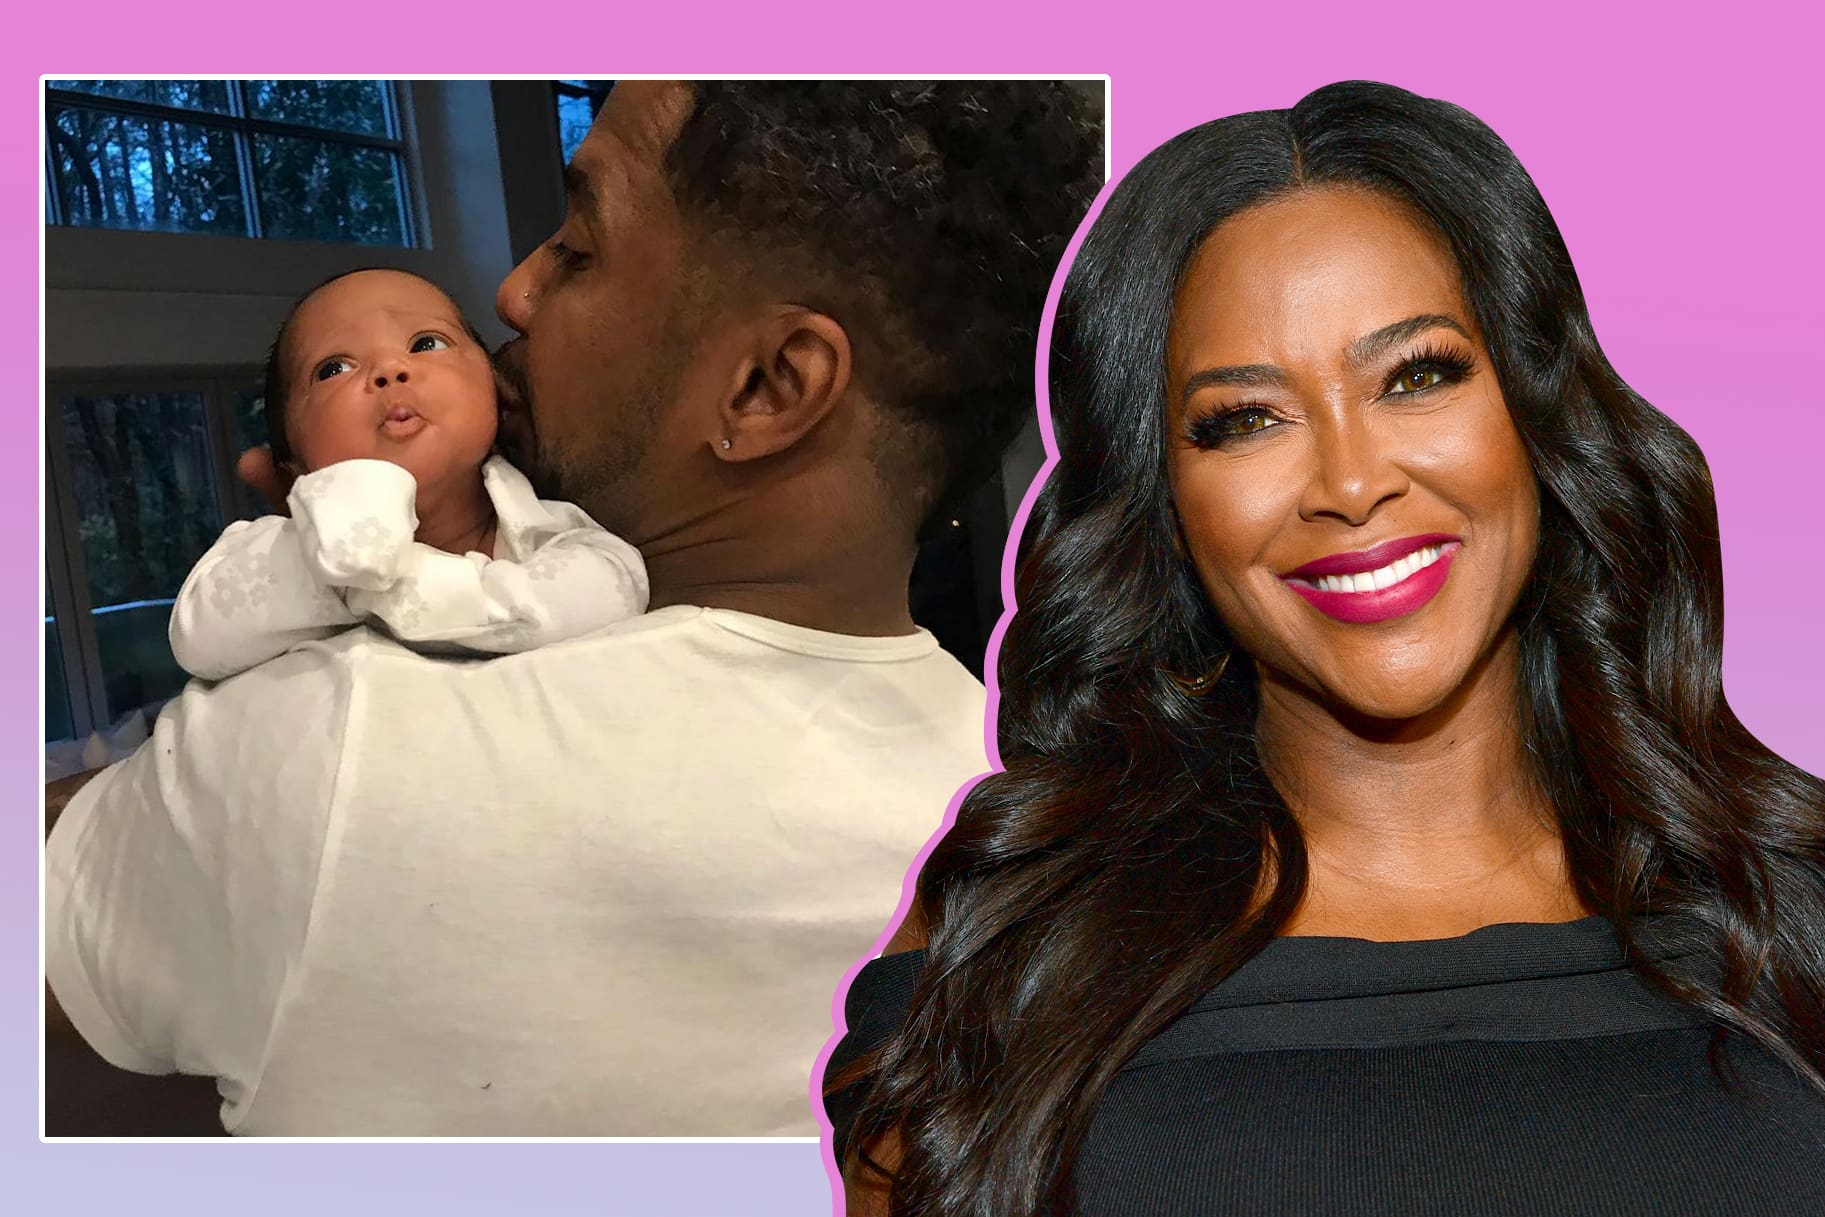 Kenya Moore Shares The Sweetest Pics With Baby Brooklyn And Her Dad, Marc Daly - Fans Are In Awe